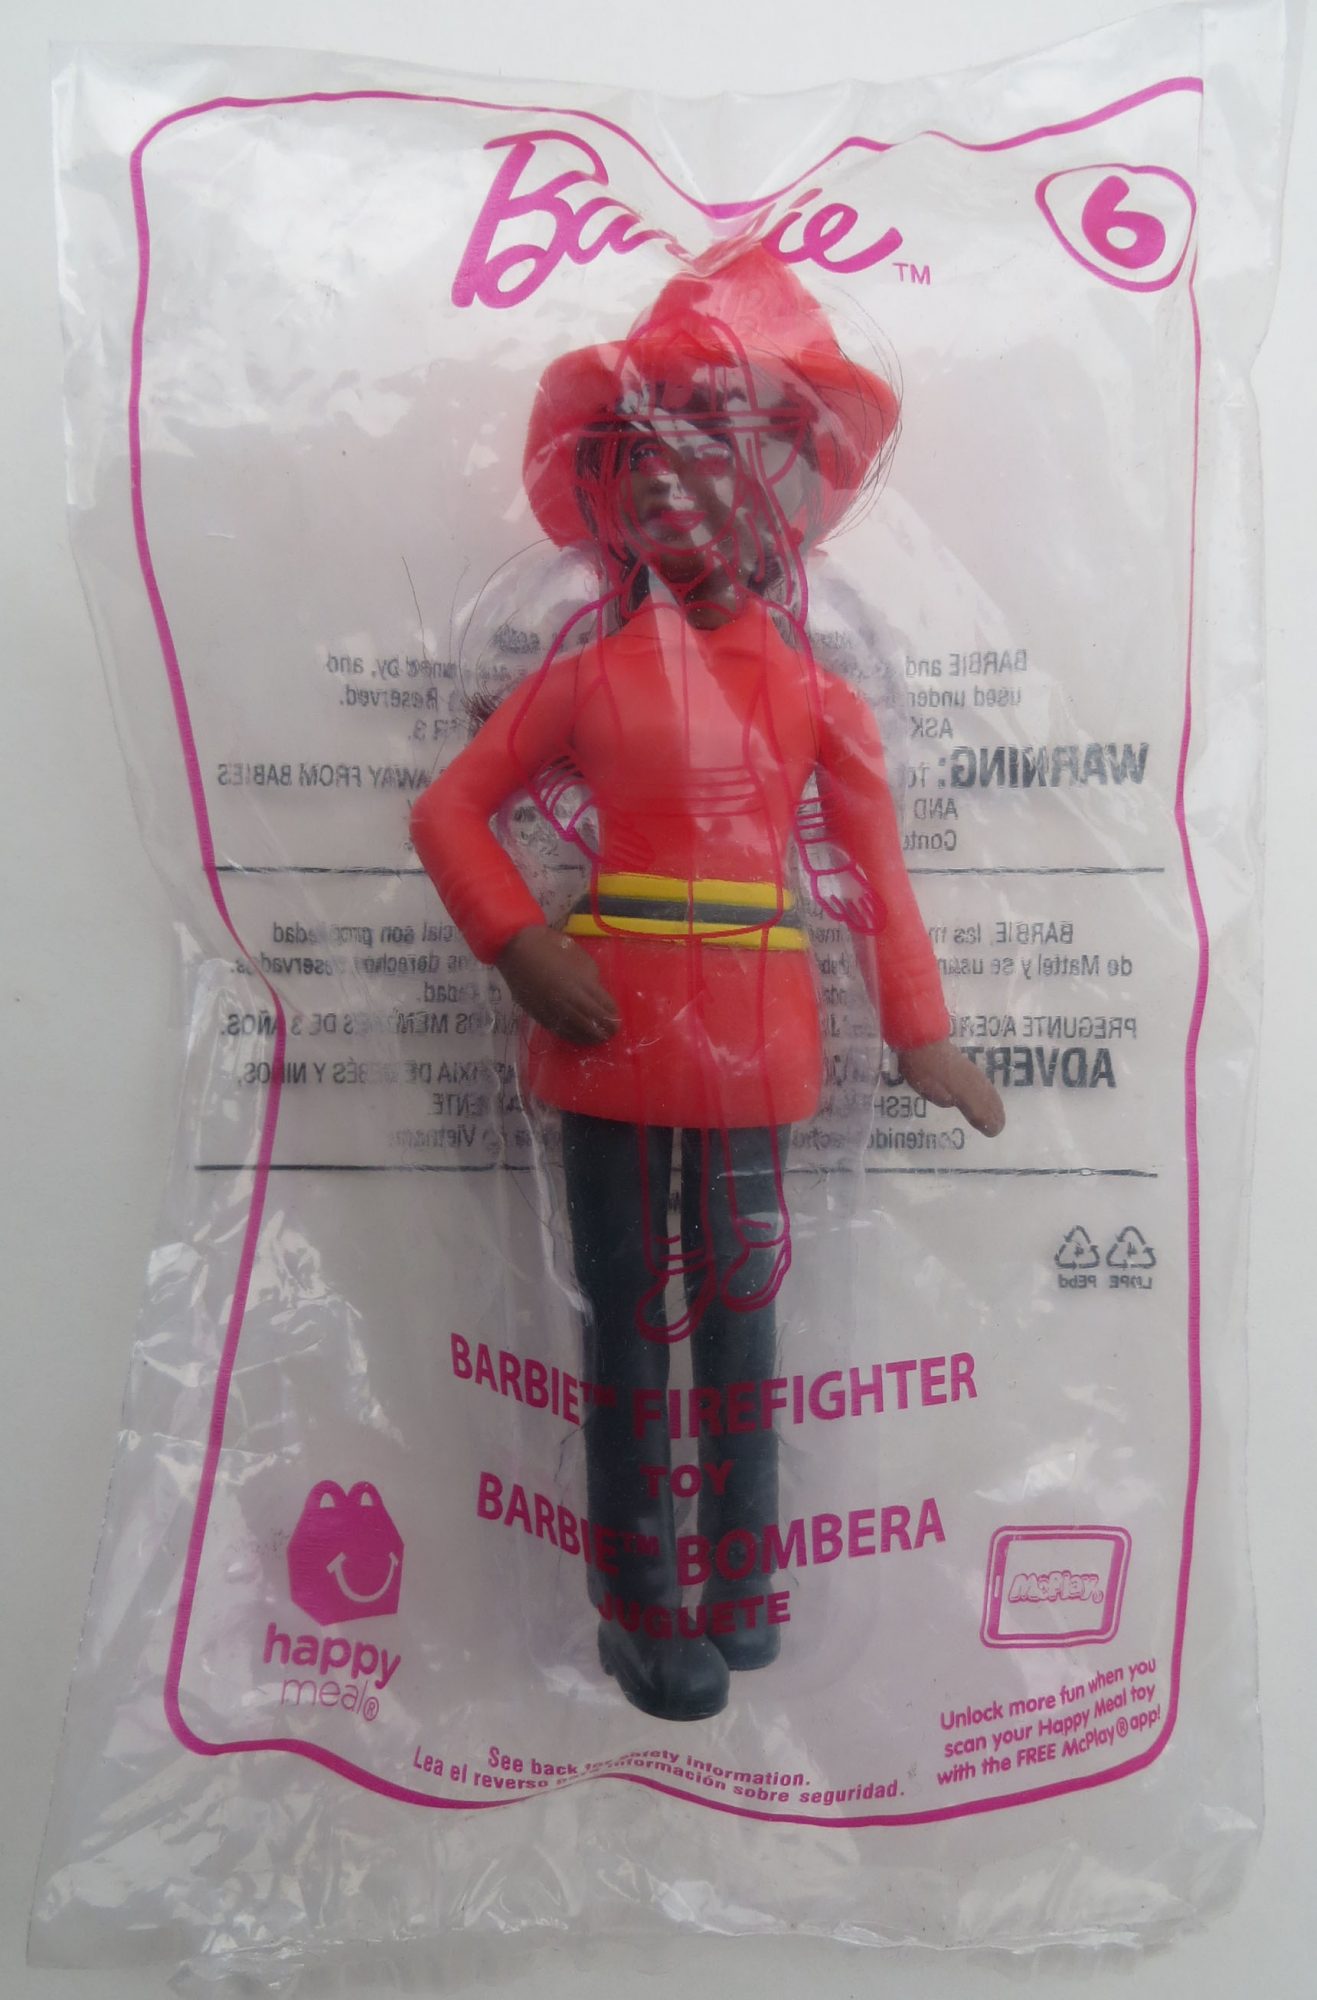 McDonalds 2019 Barbie Happy Meal Toy Brand New in Sealed Package